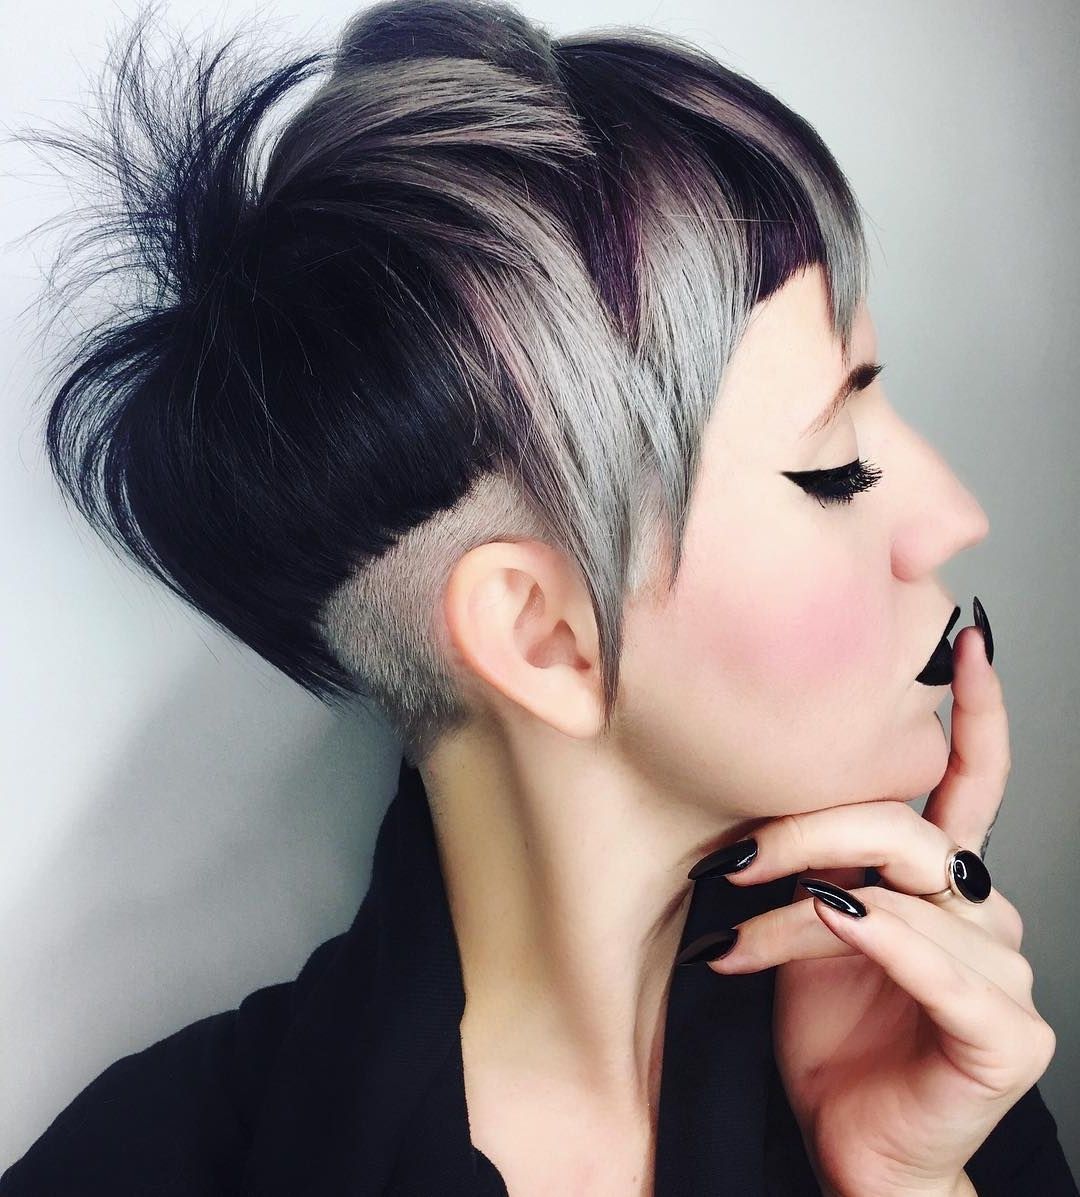 10 Latest Pixie Haircut For Women – 2018 Short Haircut Ideas With Intended For 2018 Razor Cut Pixie Hairstyles (Photo 2 of 15)